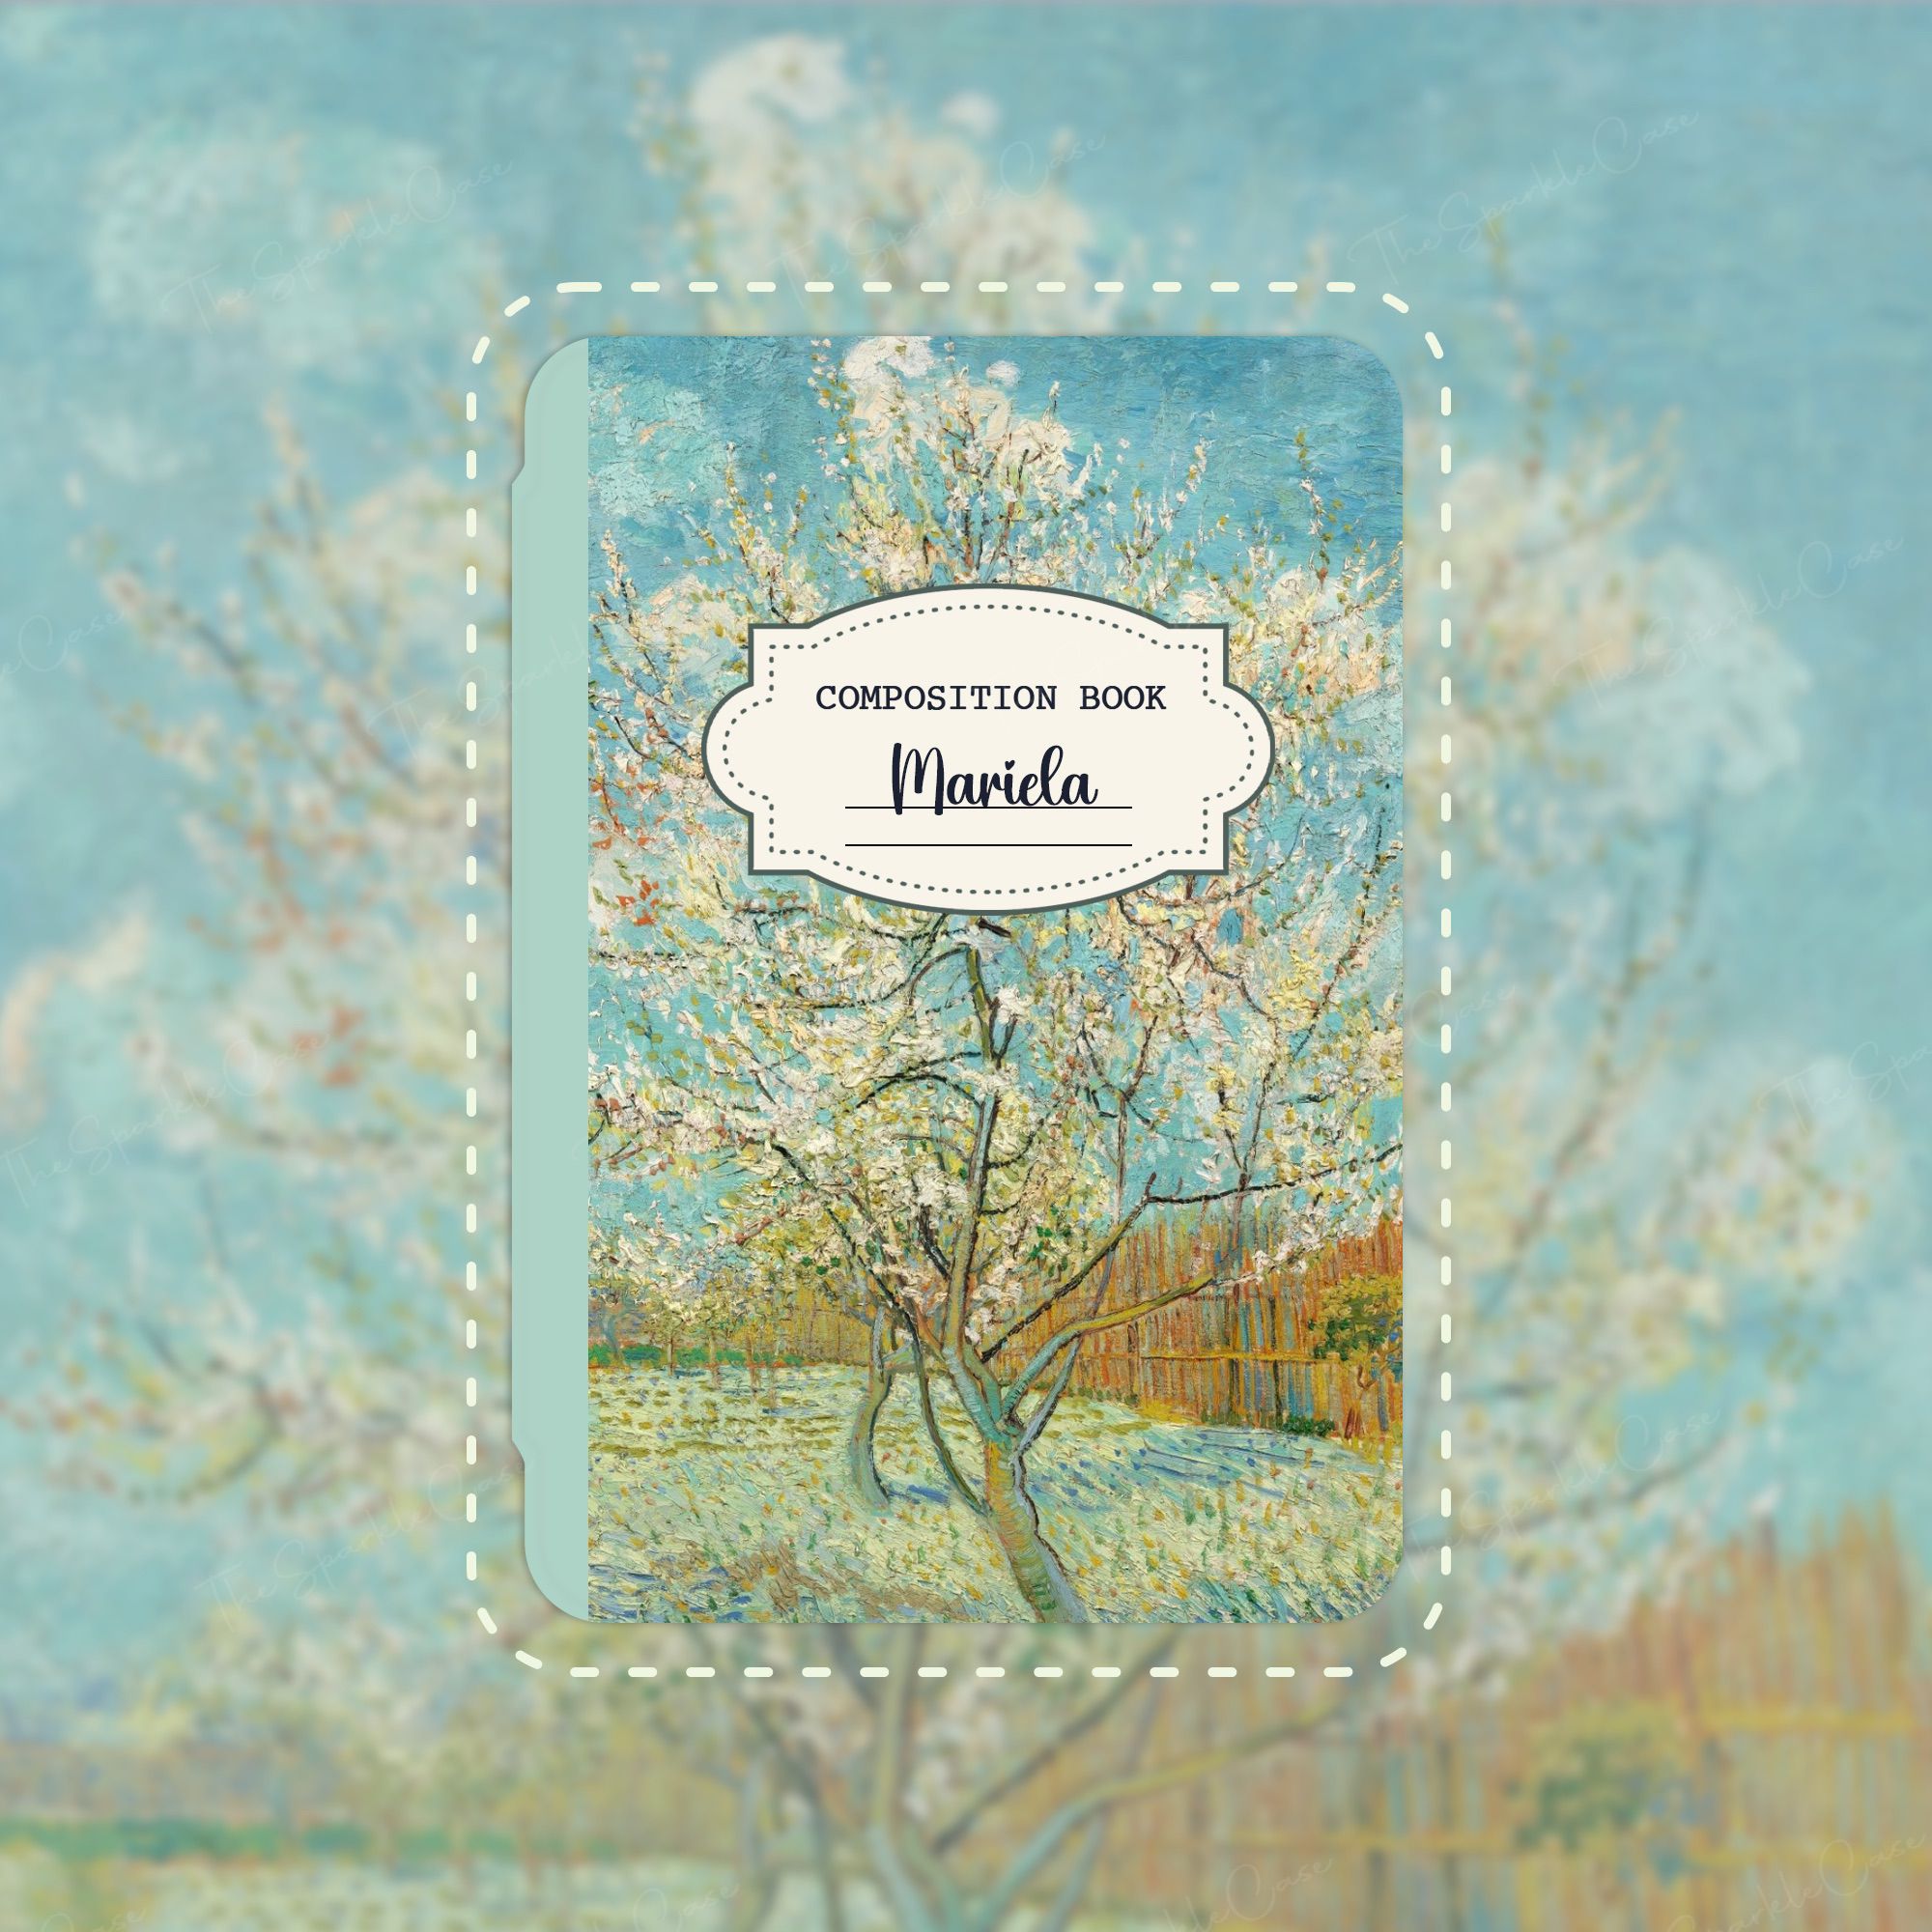 Van Gogh Composition Notebook iPad Case Cover Free Personalization The Pink Peach Tree